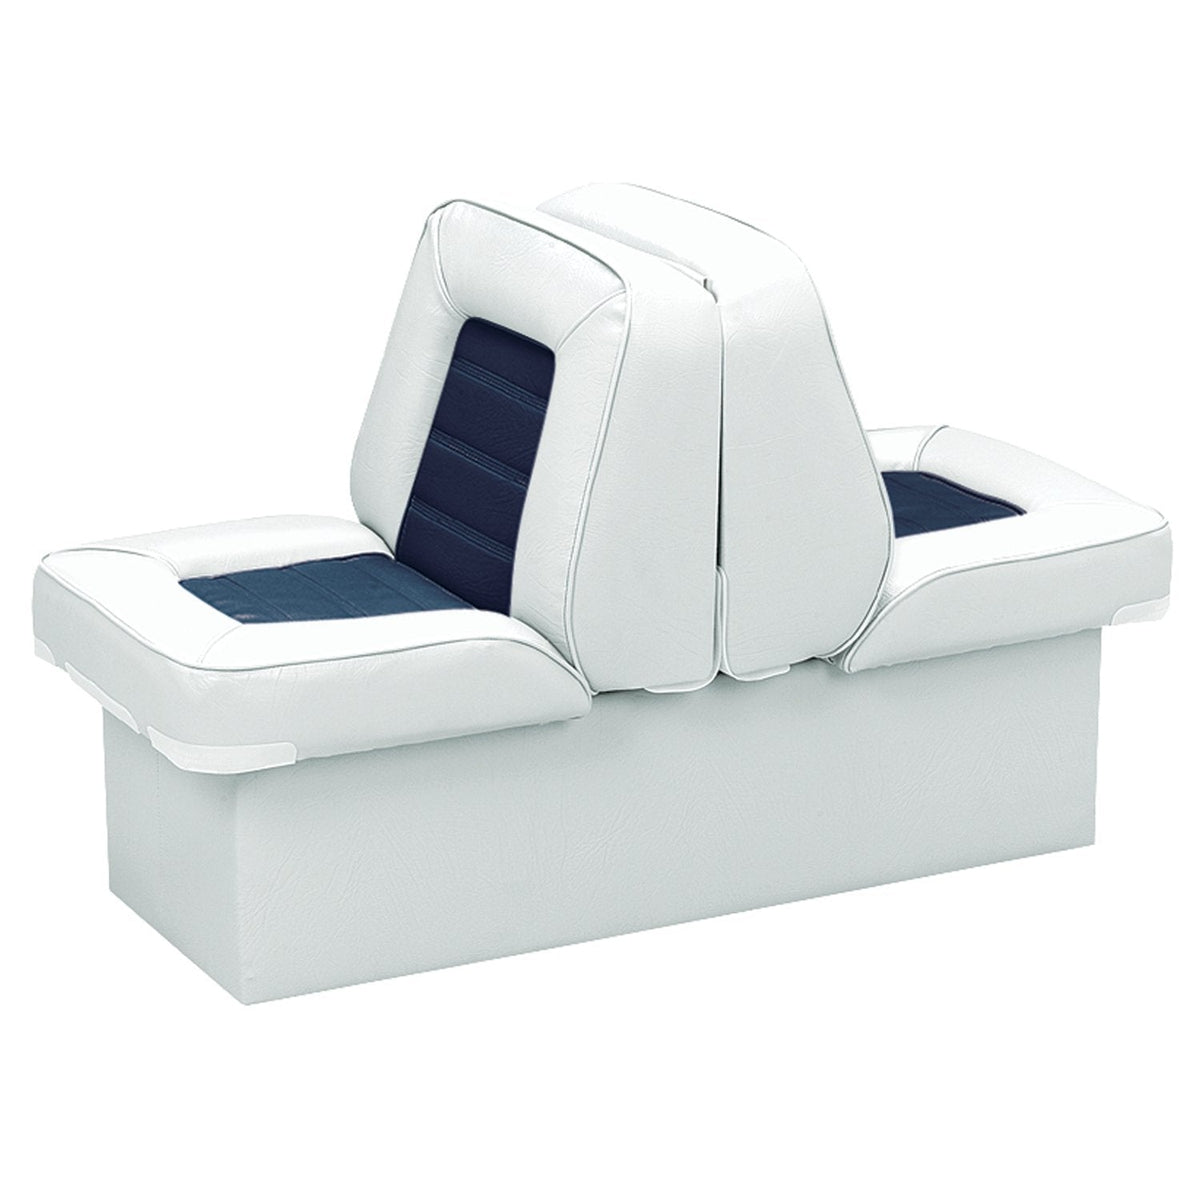 Wise Oversized - Not Qualified for Free Shipping Wise Lounge Seat Deluxe Skyline White/Navy #8WD505P-1-924